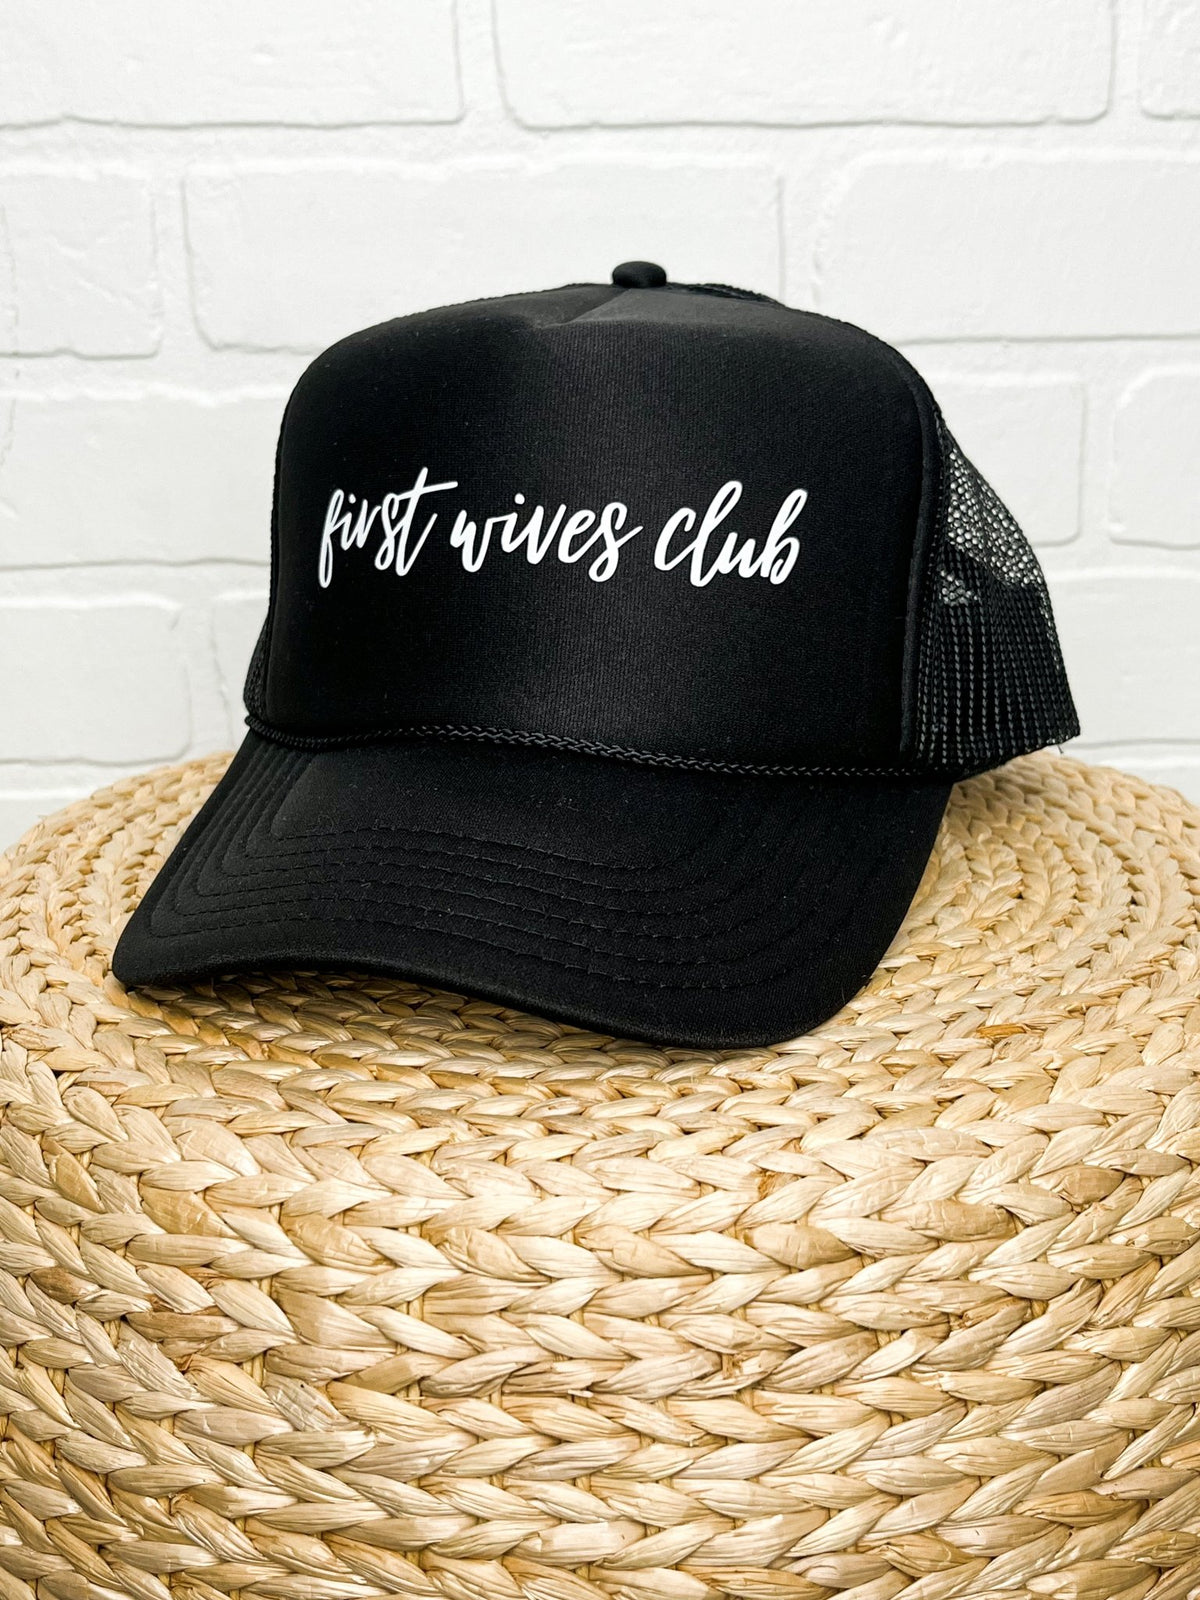 First wives club trucker hat black - Trendy Hats at Lush Fashion Lounge Boutique in Oklahoma City